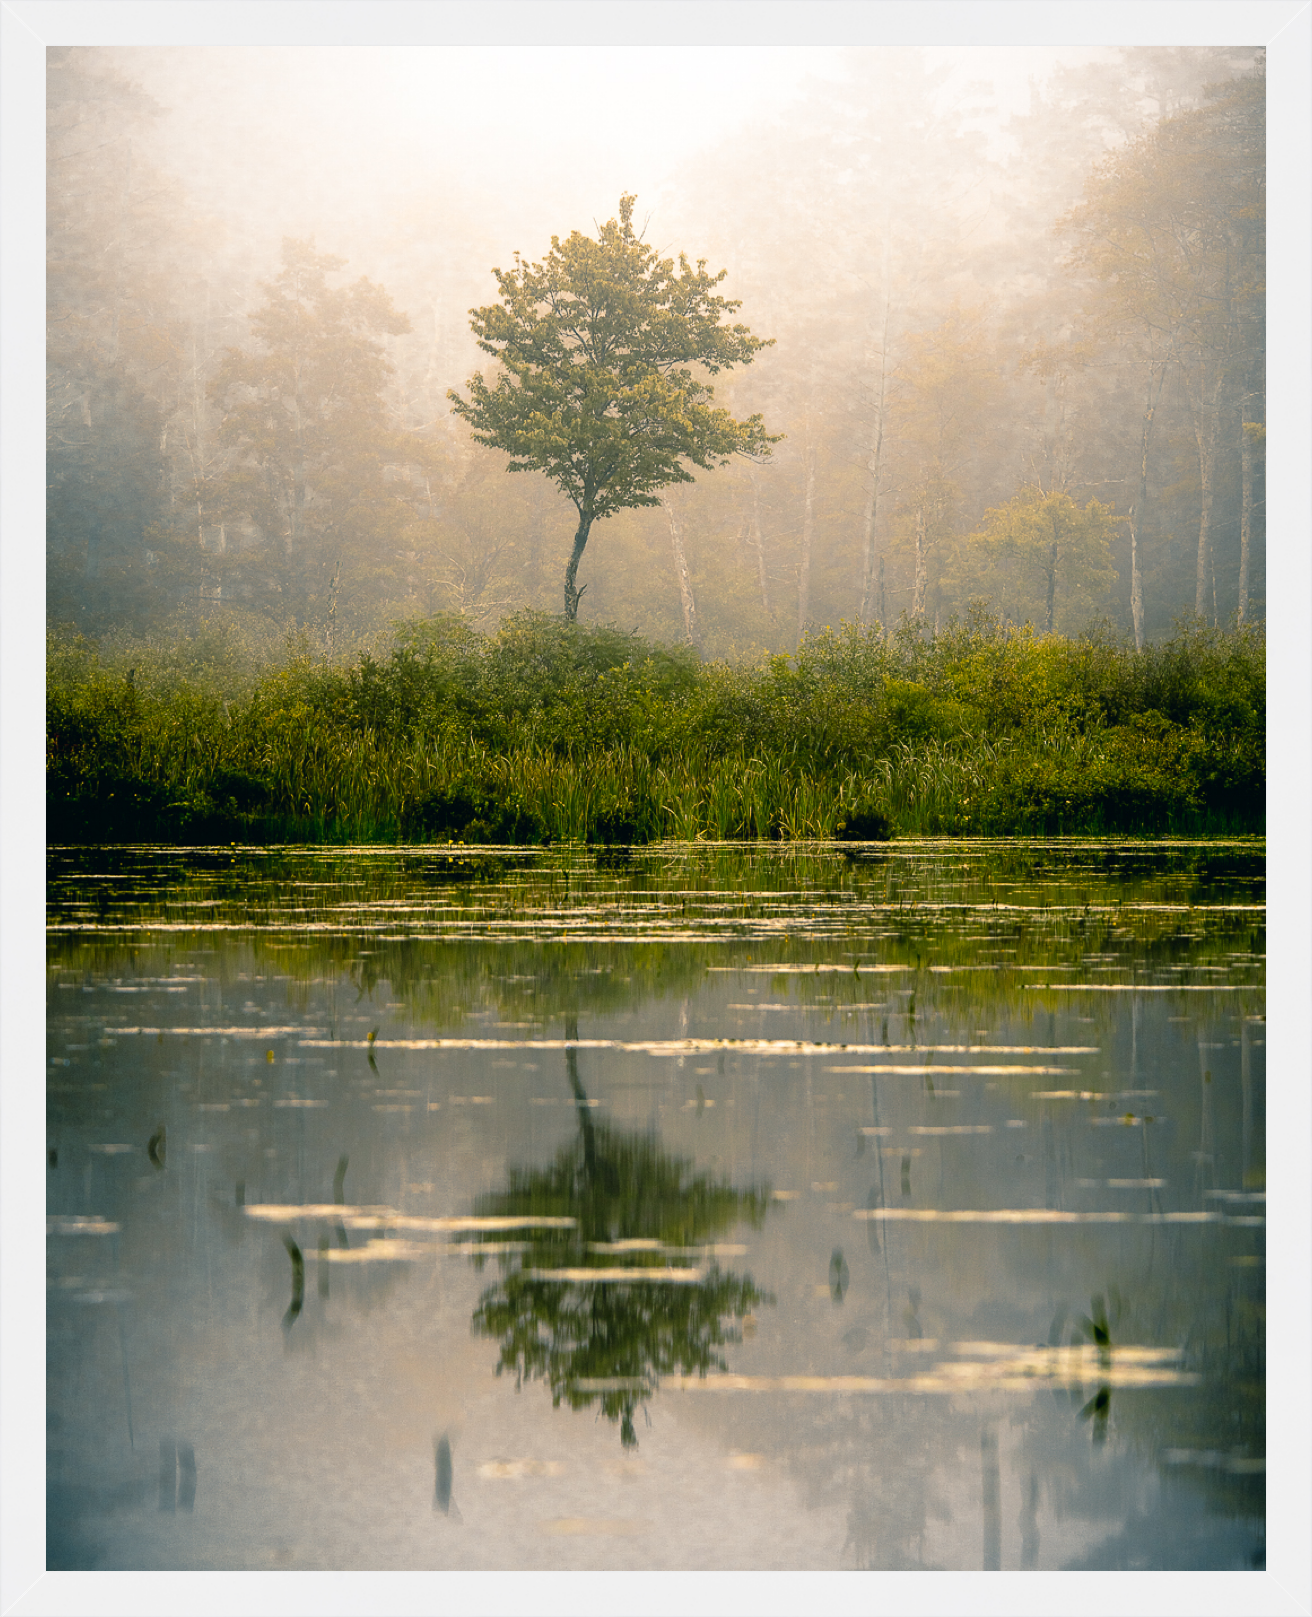 Foggy morning at Lake Wyola by Jamie Malcolm Brown